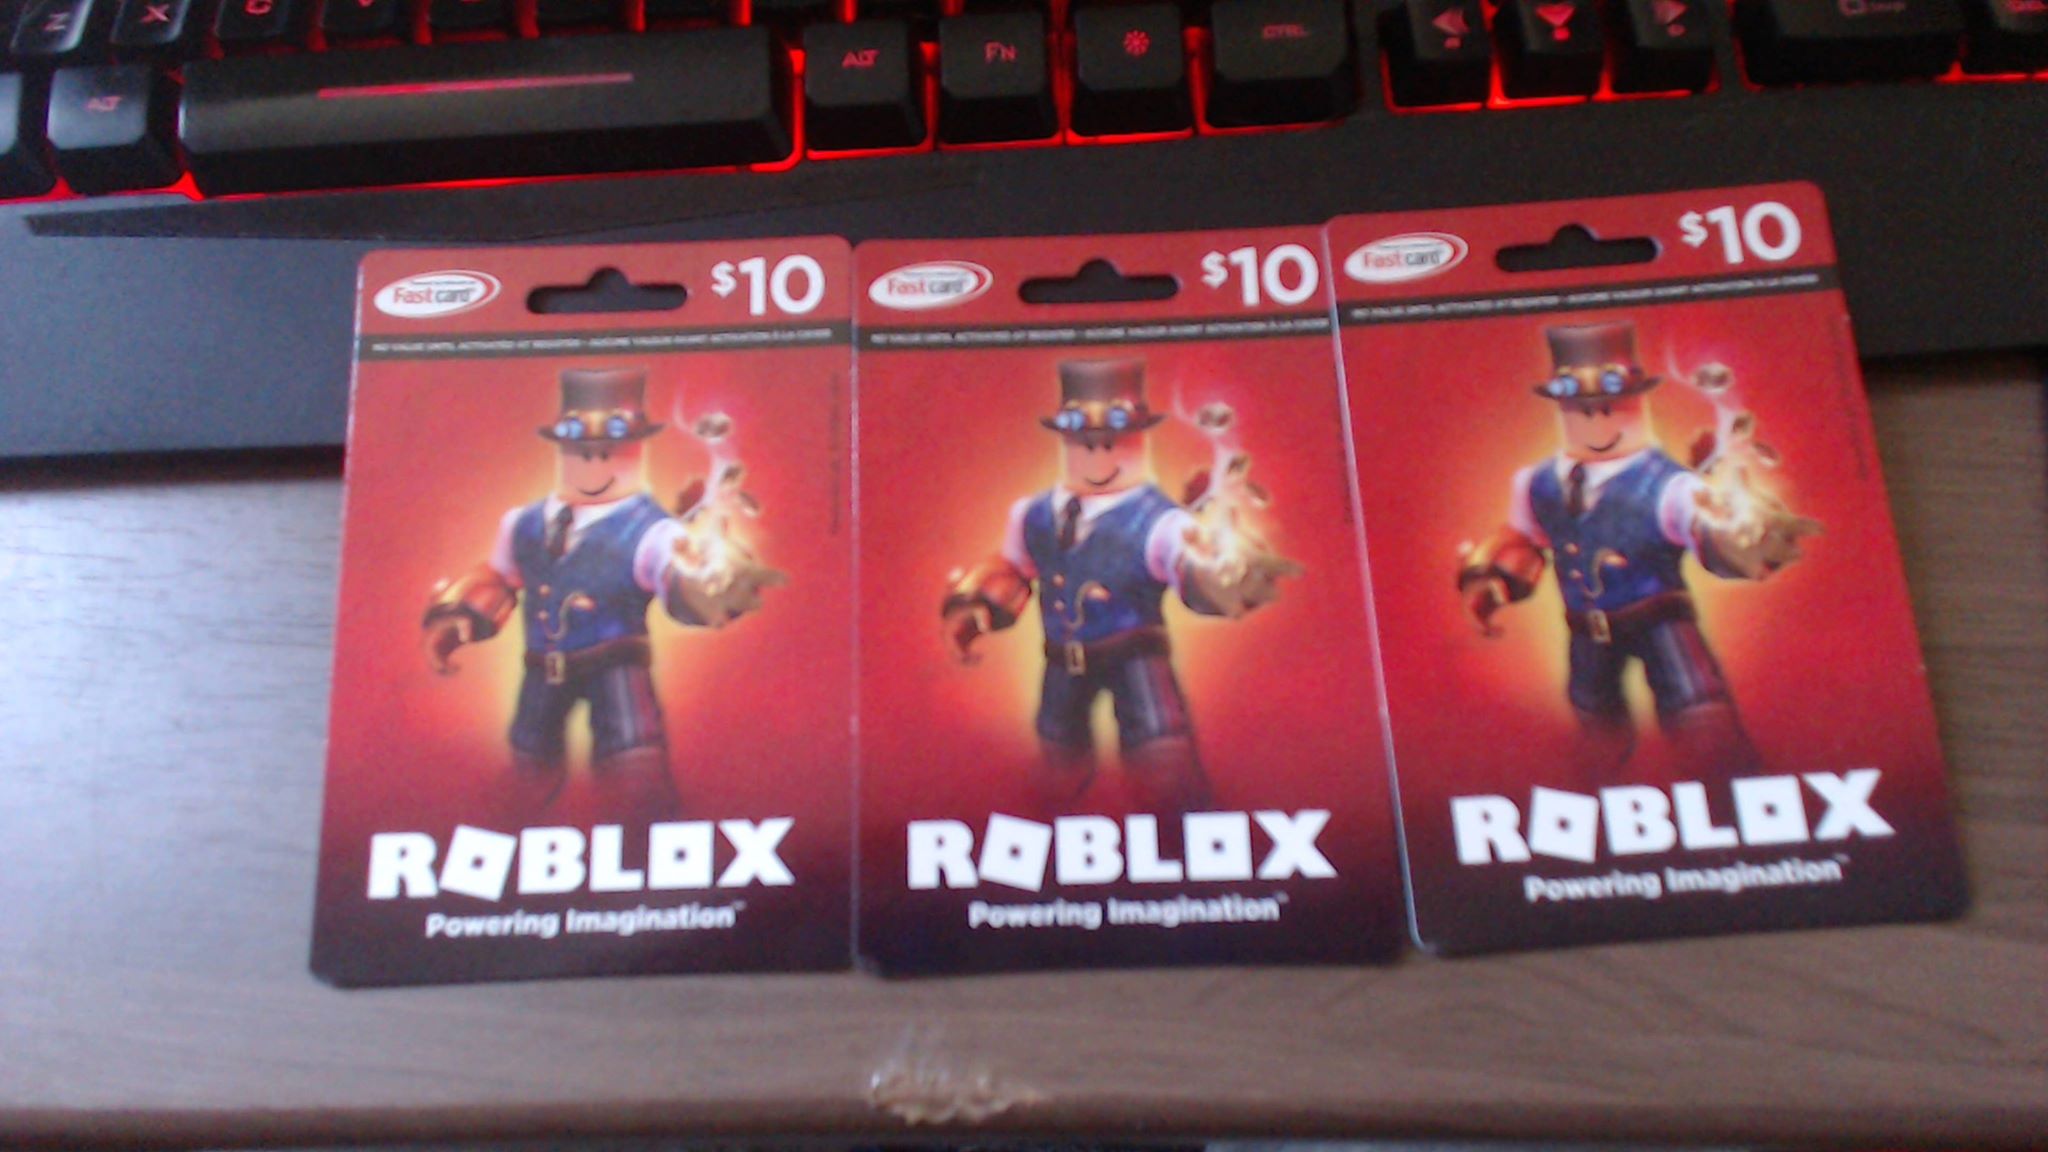 Use Code Matrix On Twitter Ok Trixsters Here S Your Chance To Win A Free Robux Gift Card You Guys Mean So Much To Me And This Is Just A Little Way - roblox cringely